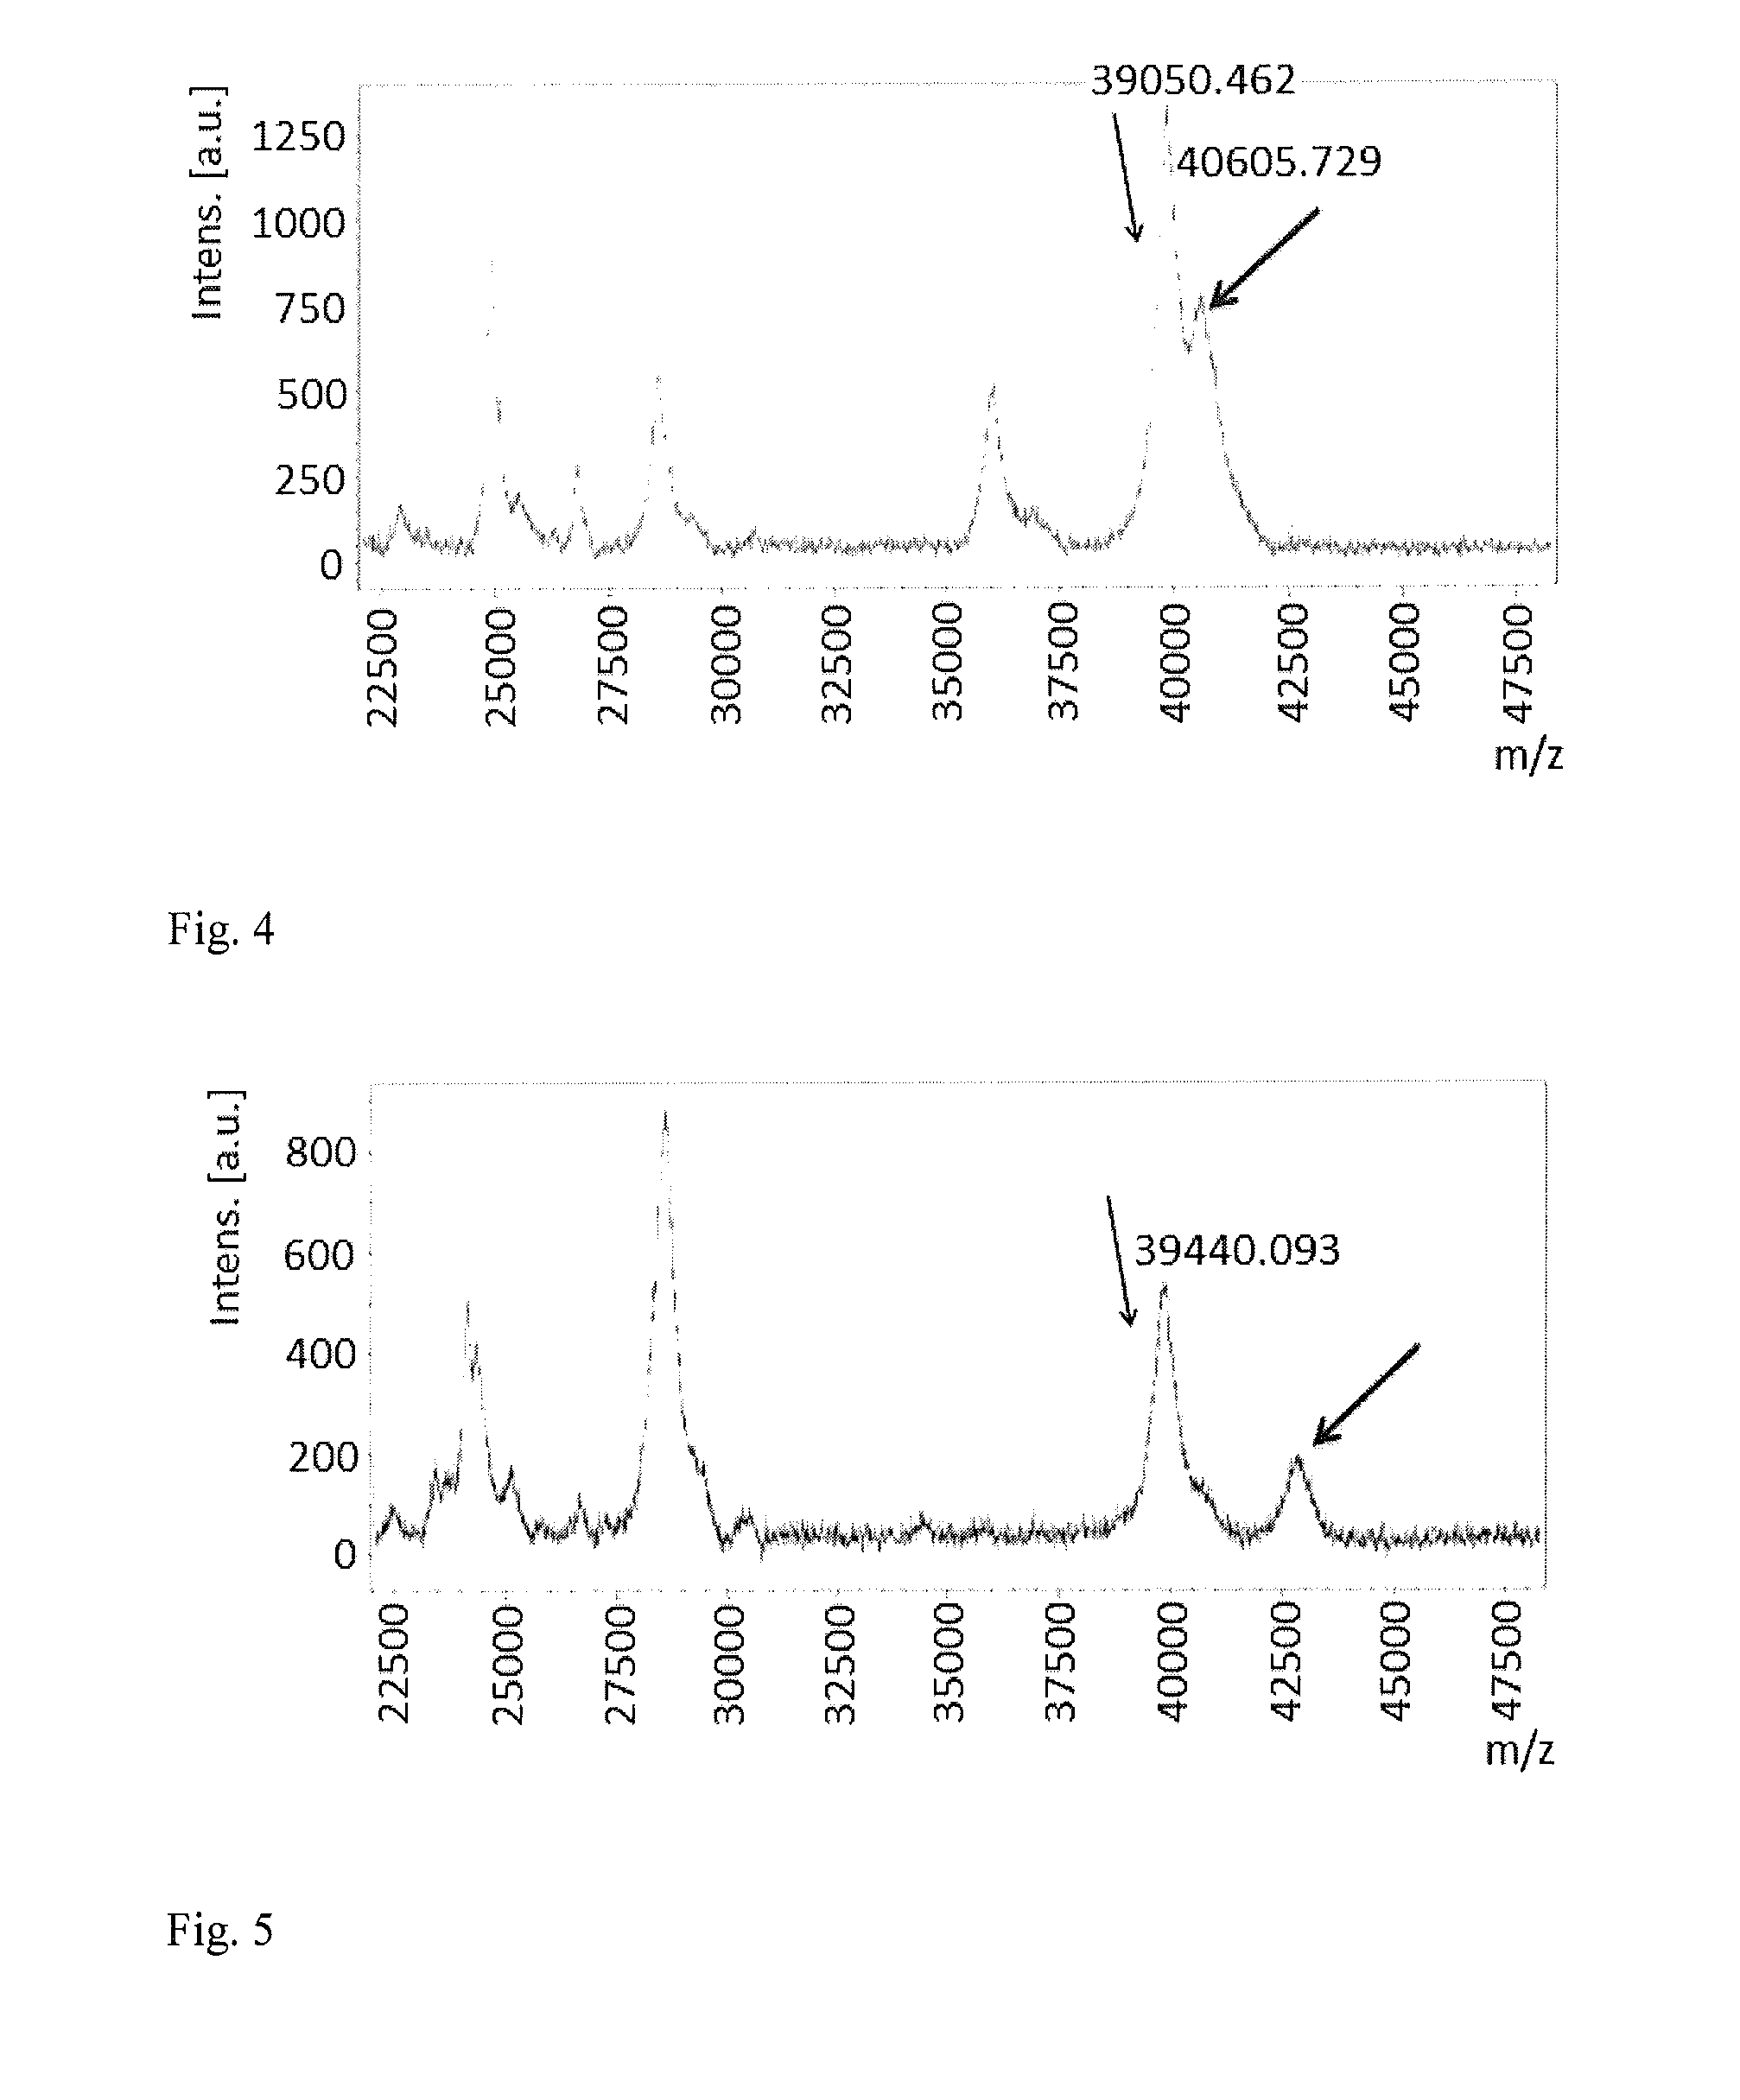 Method of detection of gram-negative bacteria periplasmic space and cell wall outer membrane proteins by mass spectrometry